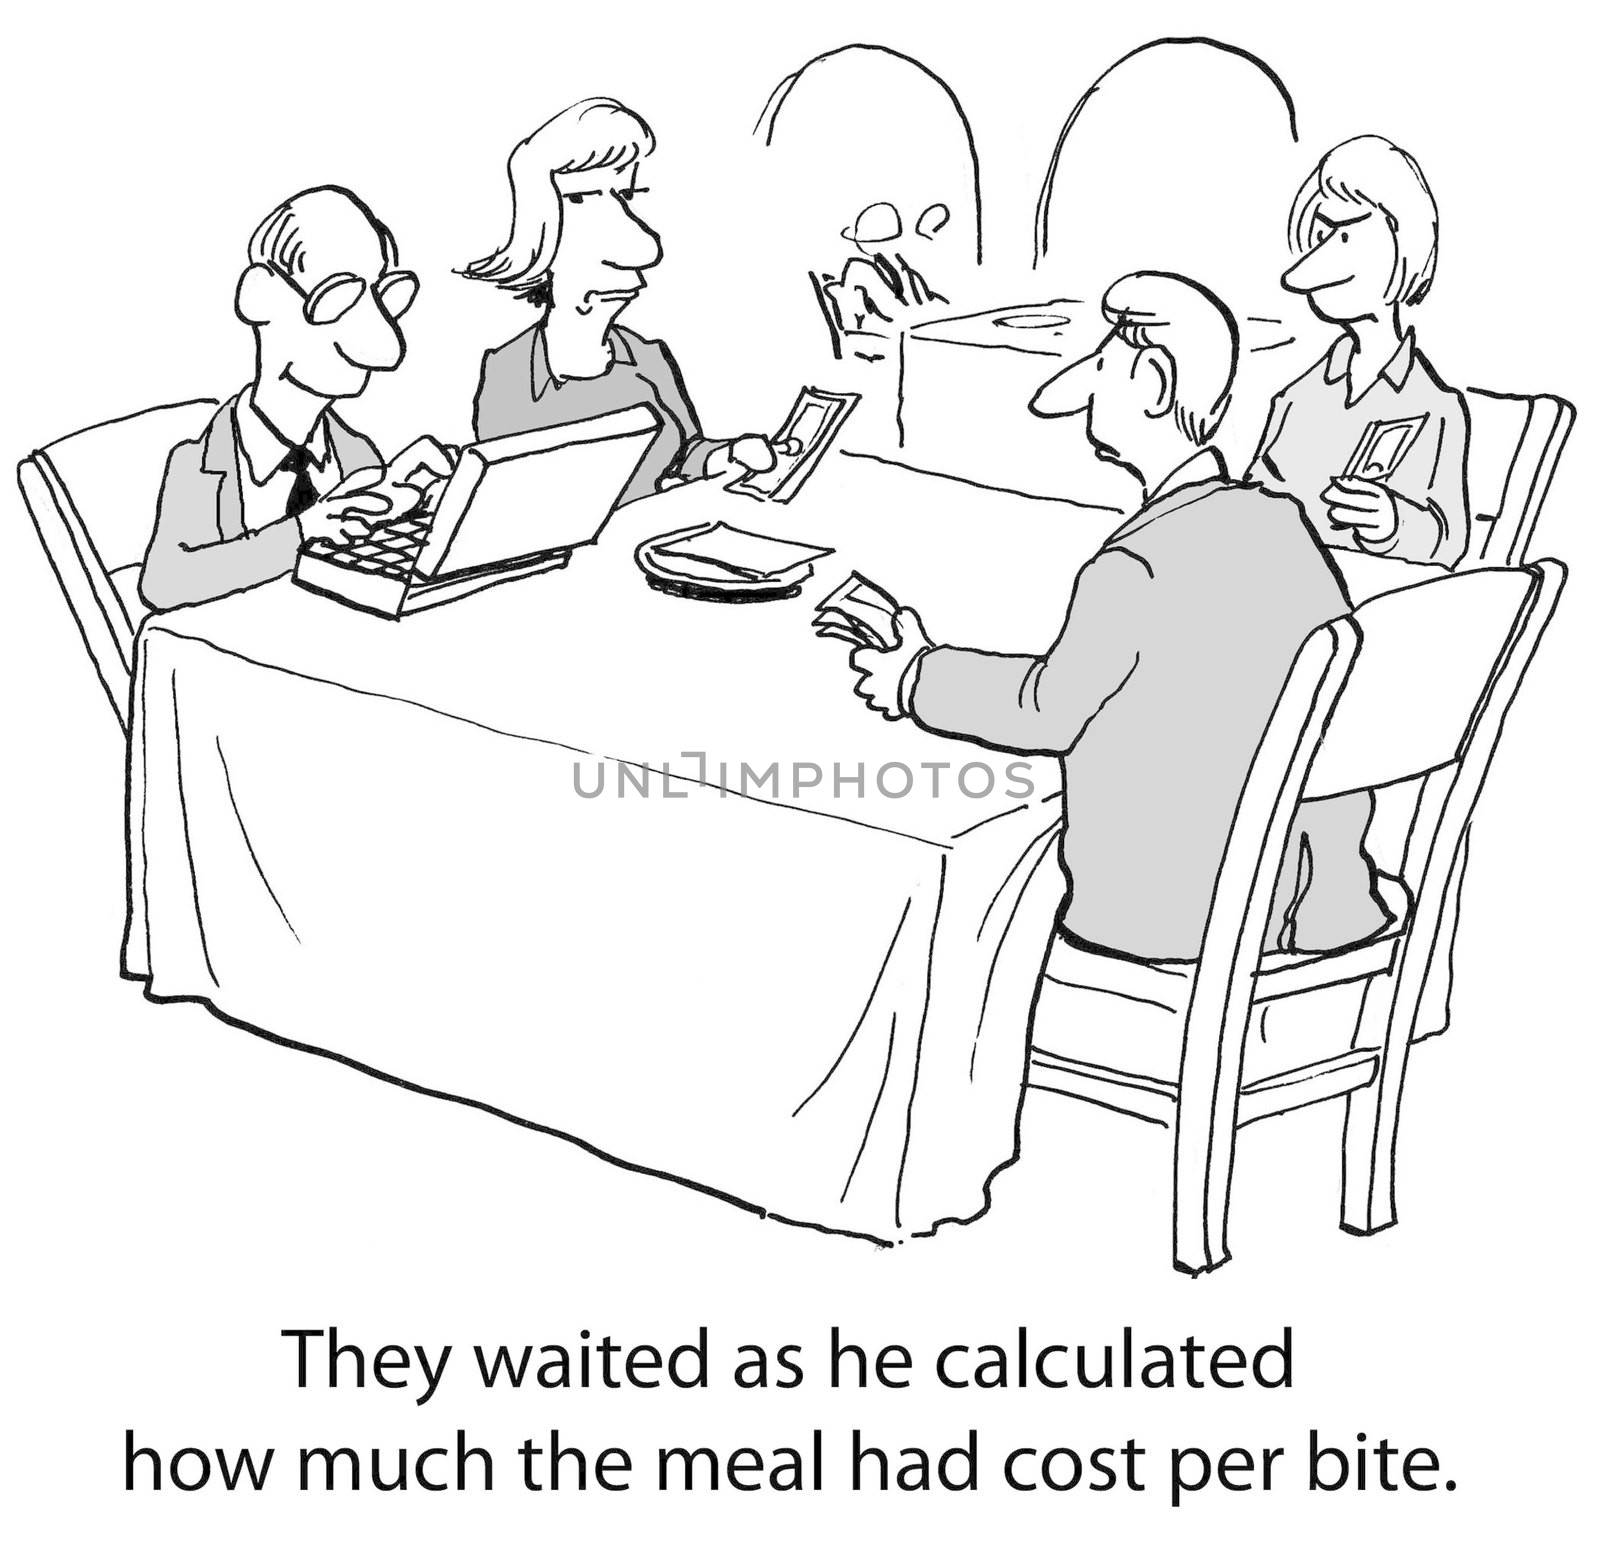 They waited as he calculated how much the meal had cost per bite.